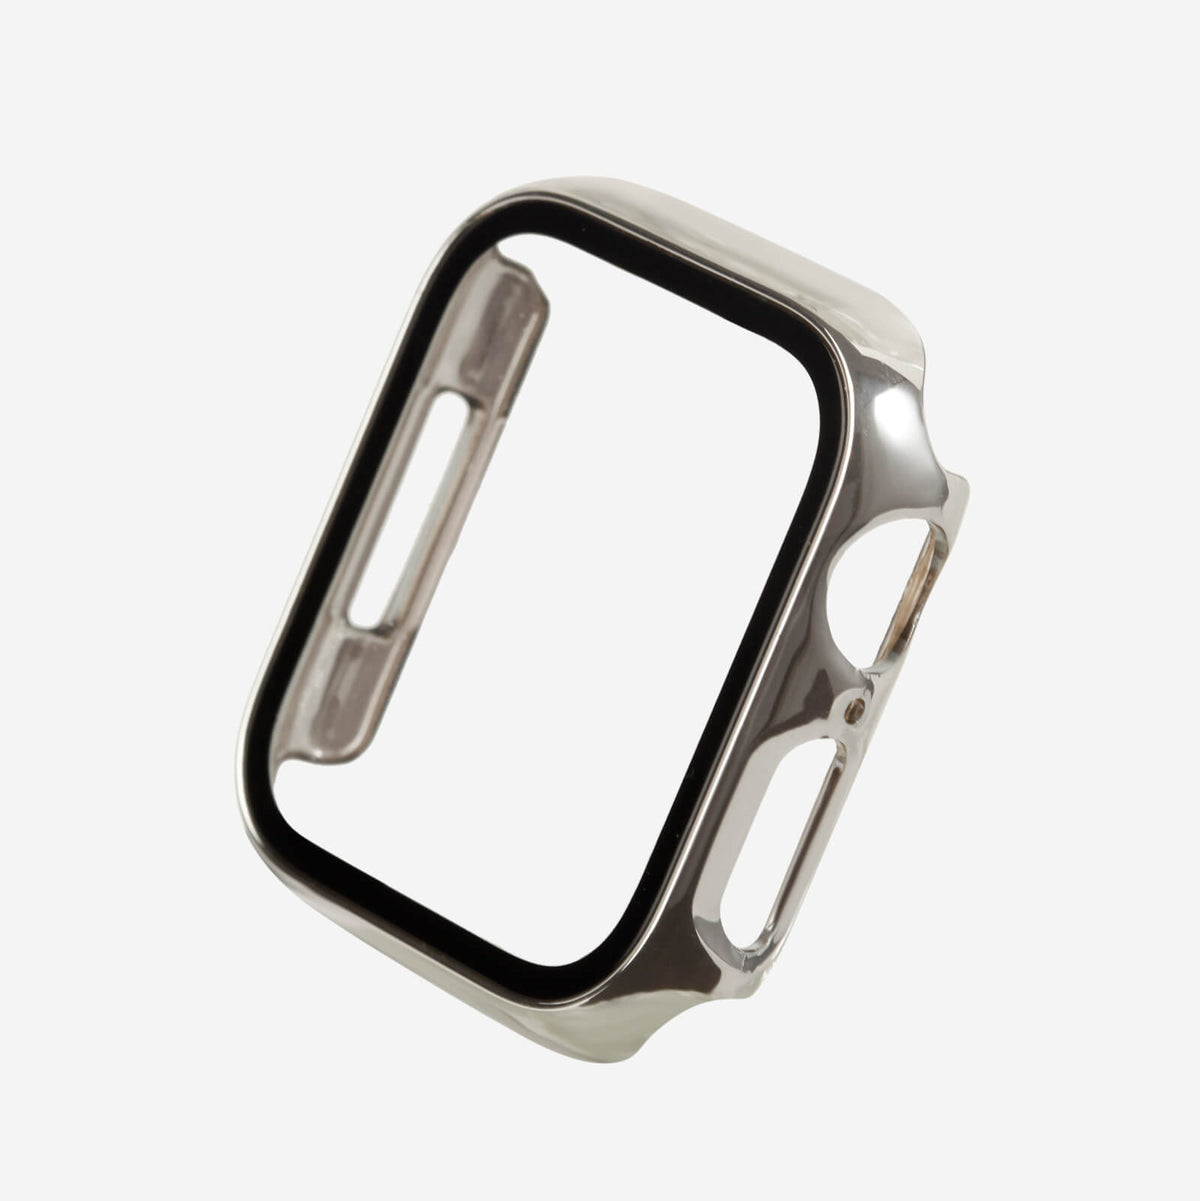 Apple Watch Chrome Screen Protector Case - Silver